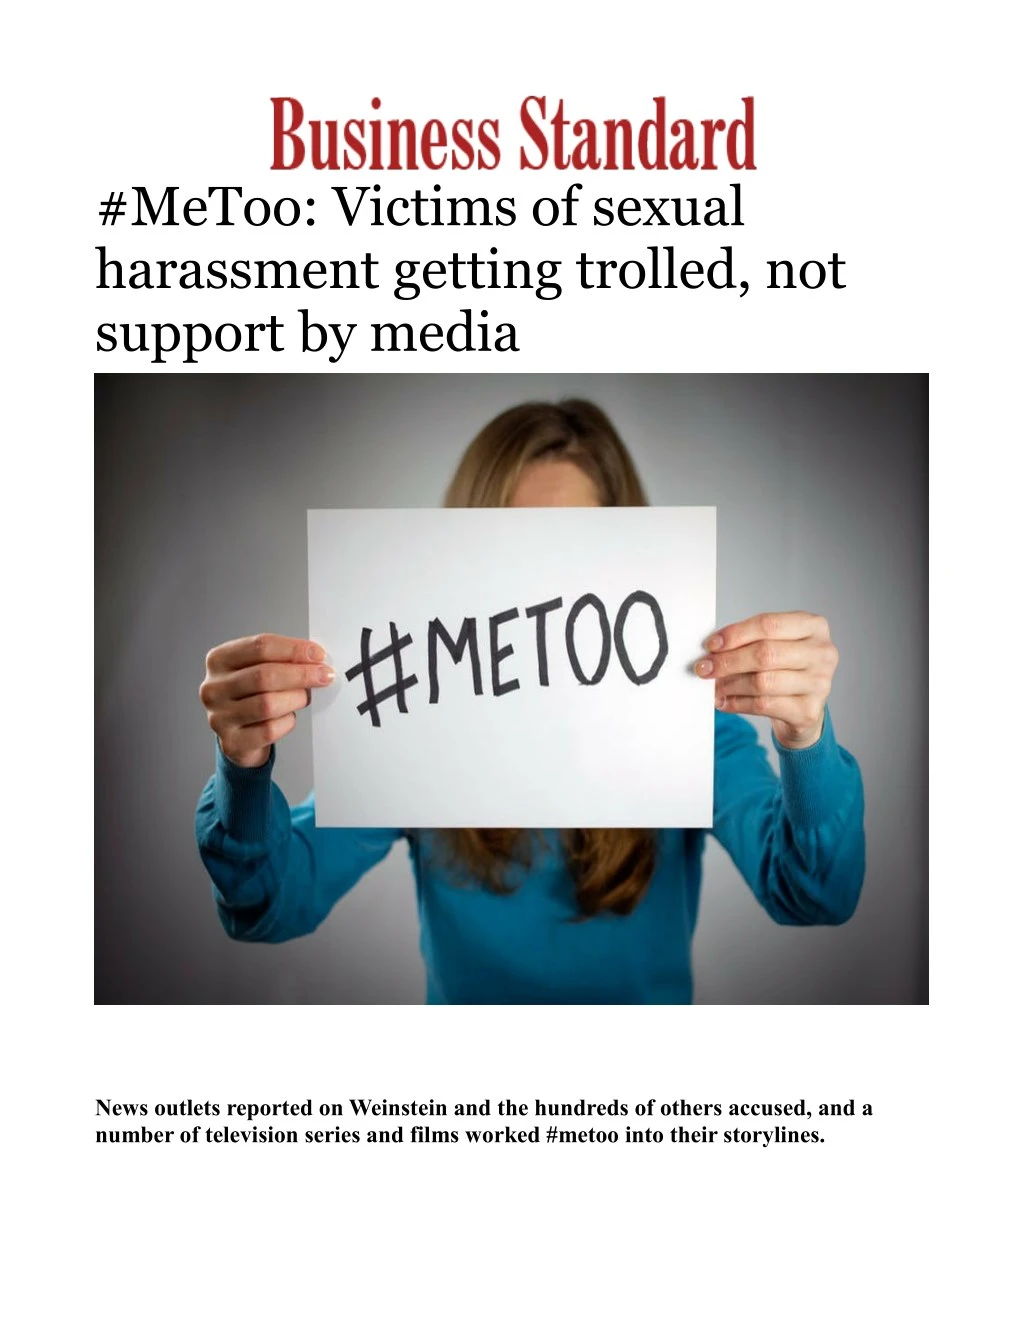 metoo victims of sexual harassment getting